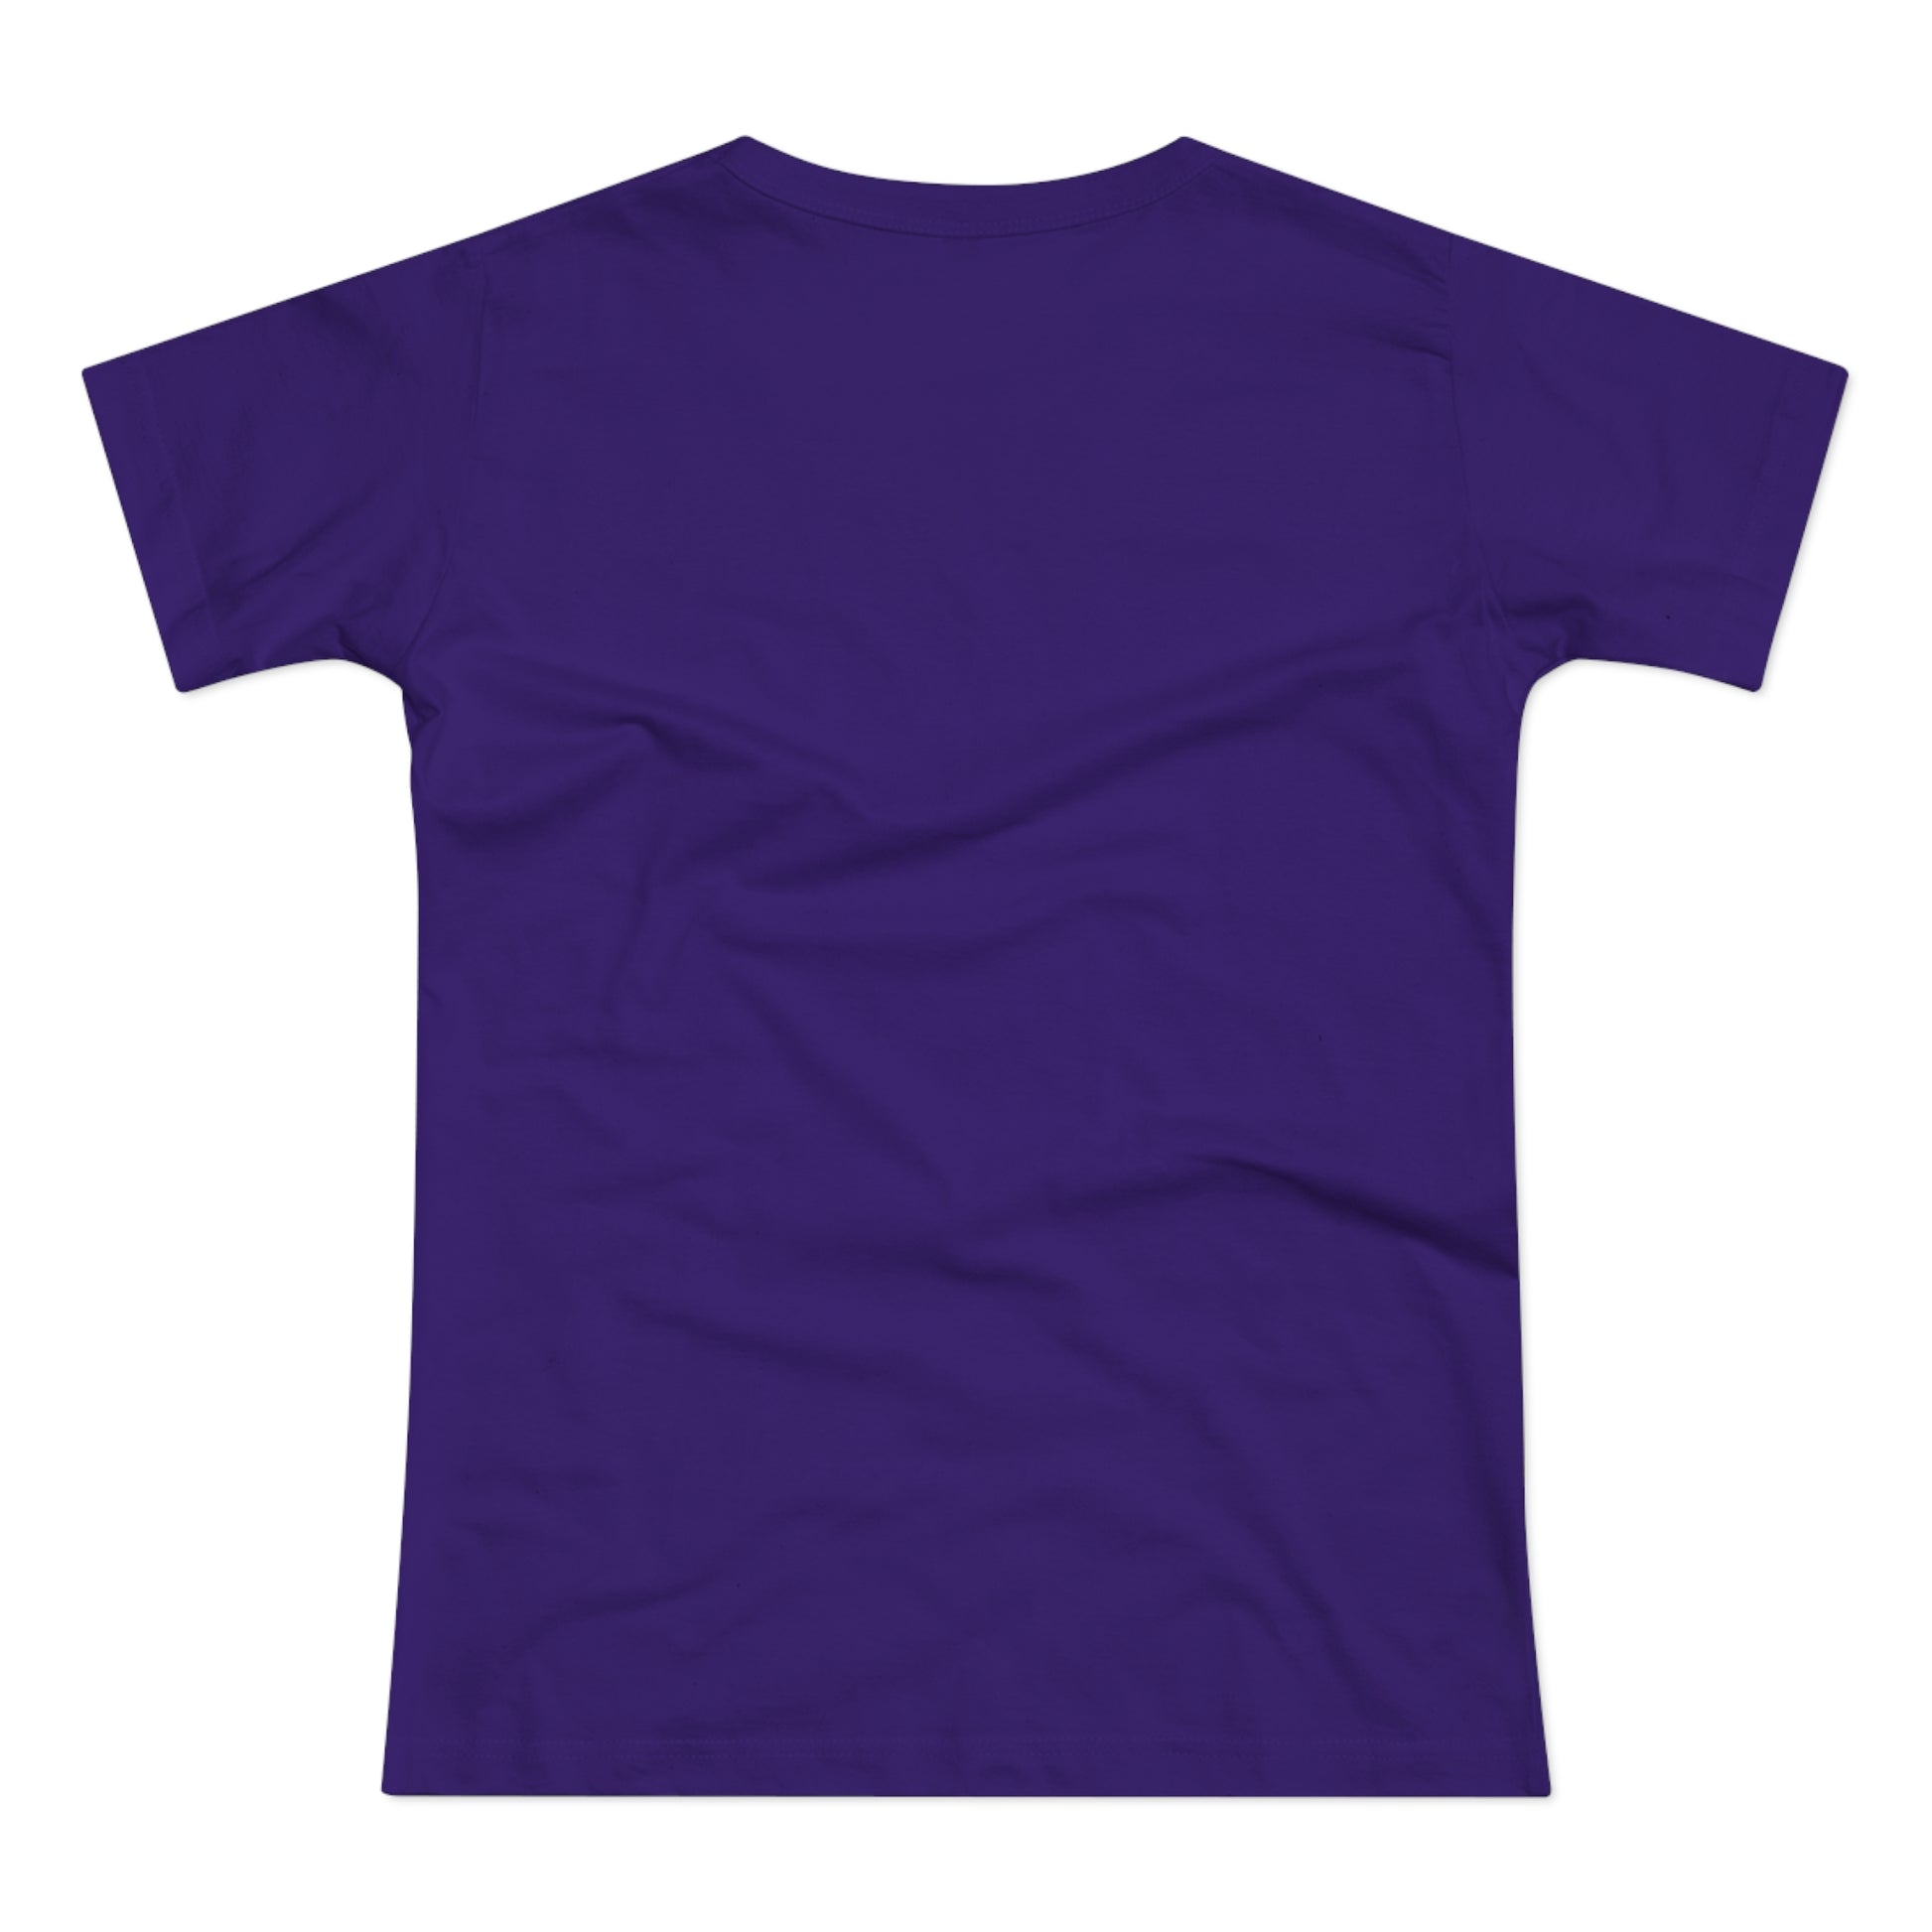 a purple t - shirt on a white background